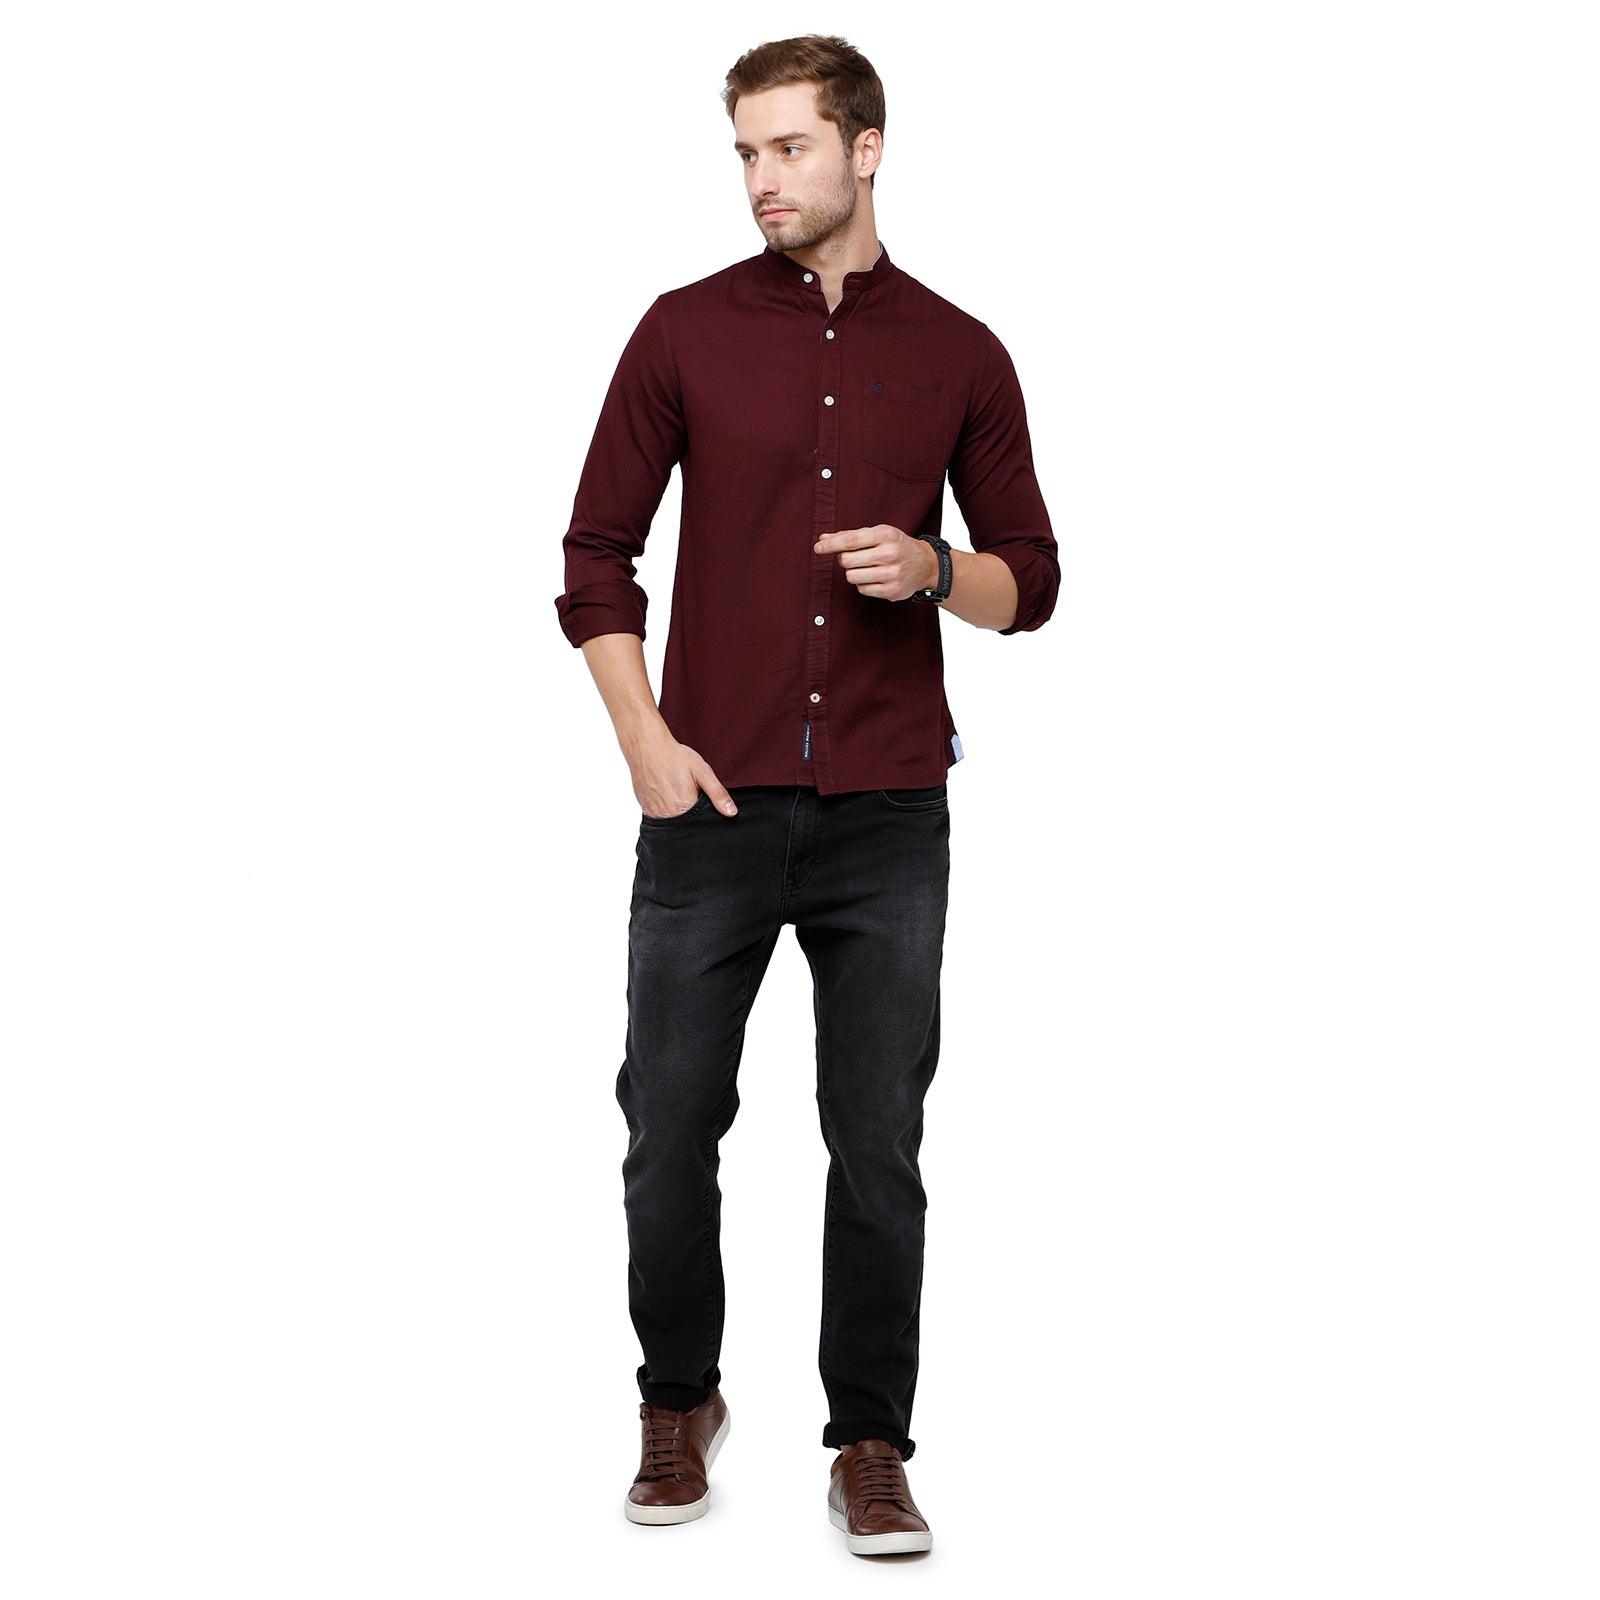 Double two Men Solid Maroon Mandarin collar Long Sleeves 100% Cotton Slim Fit Casual shirt